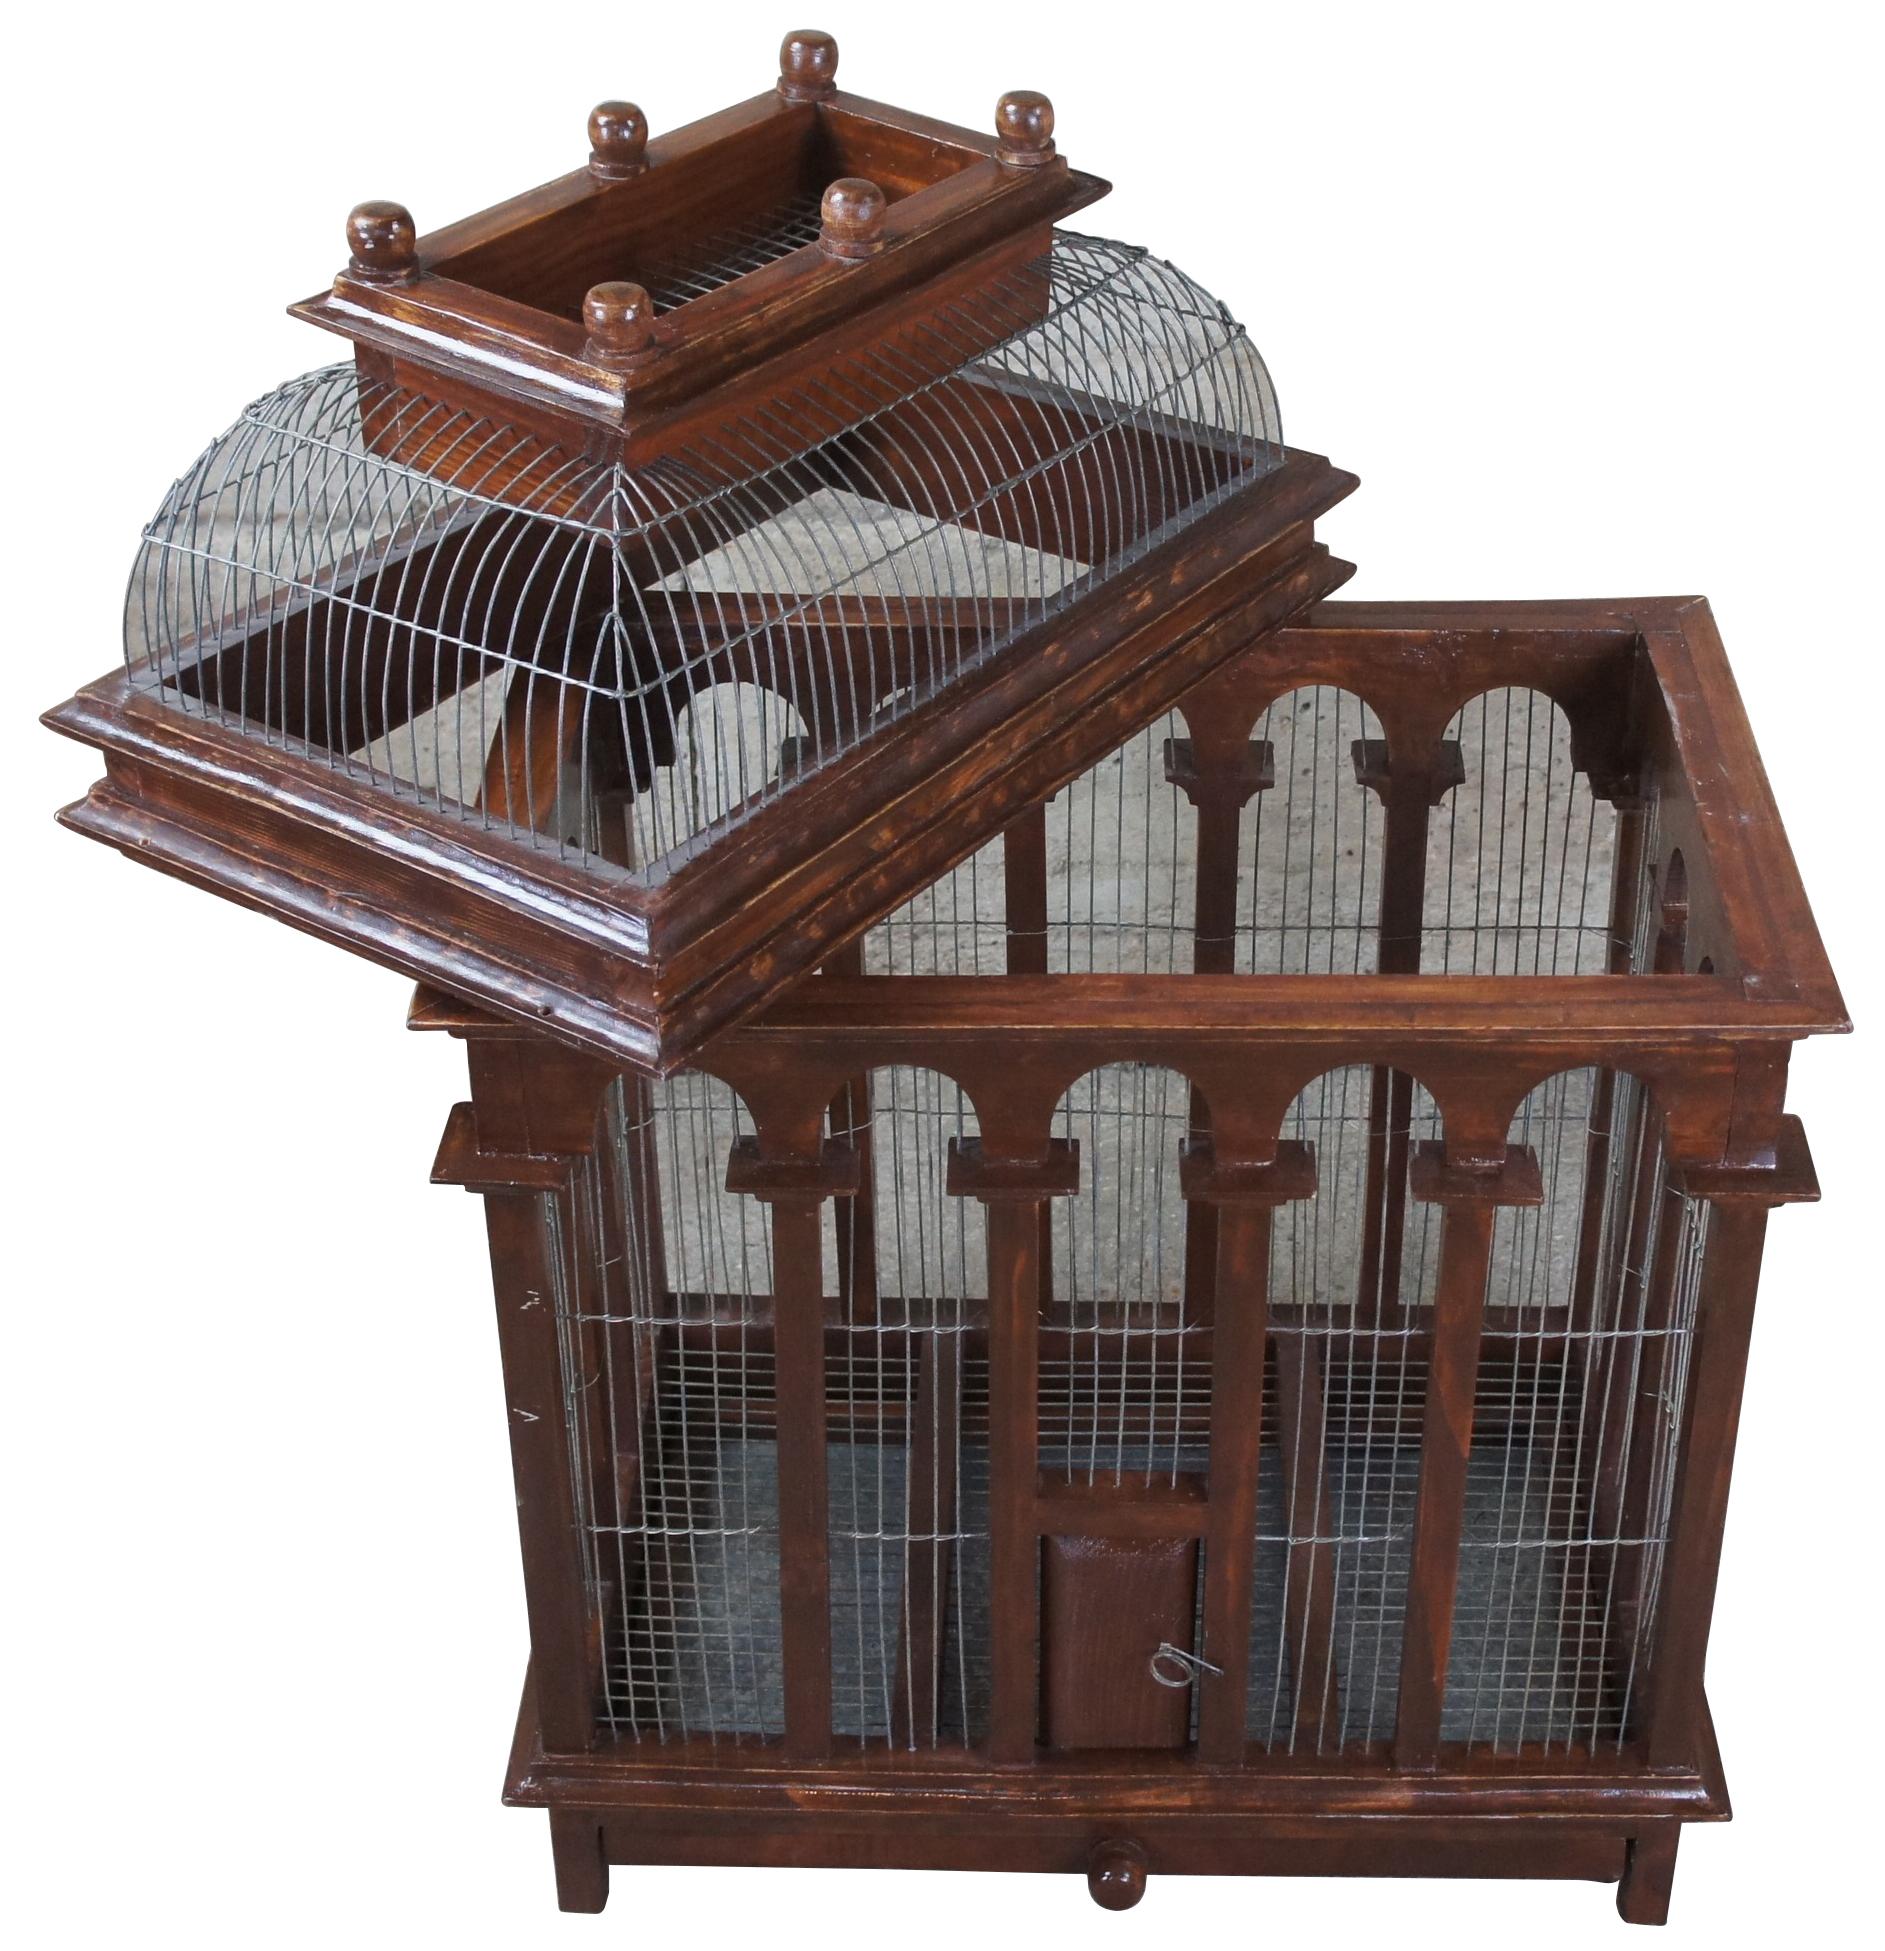 Victorian architectural carved birdcage. Perfect for birds or the display of airplants, succulents and moss. Made out of wood and wire with front door, sliding tray on bottom for cleaning and removable dome top. Mesure: 34